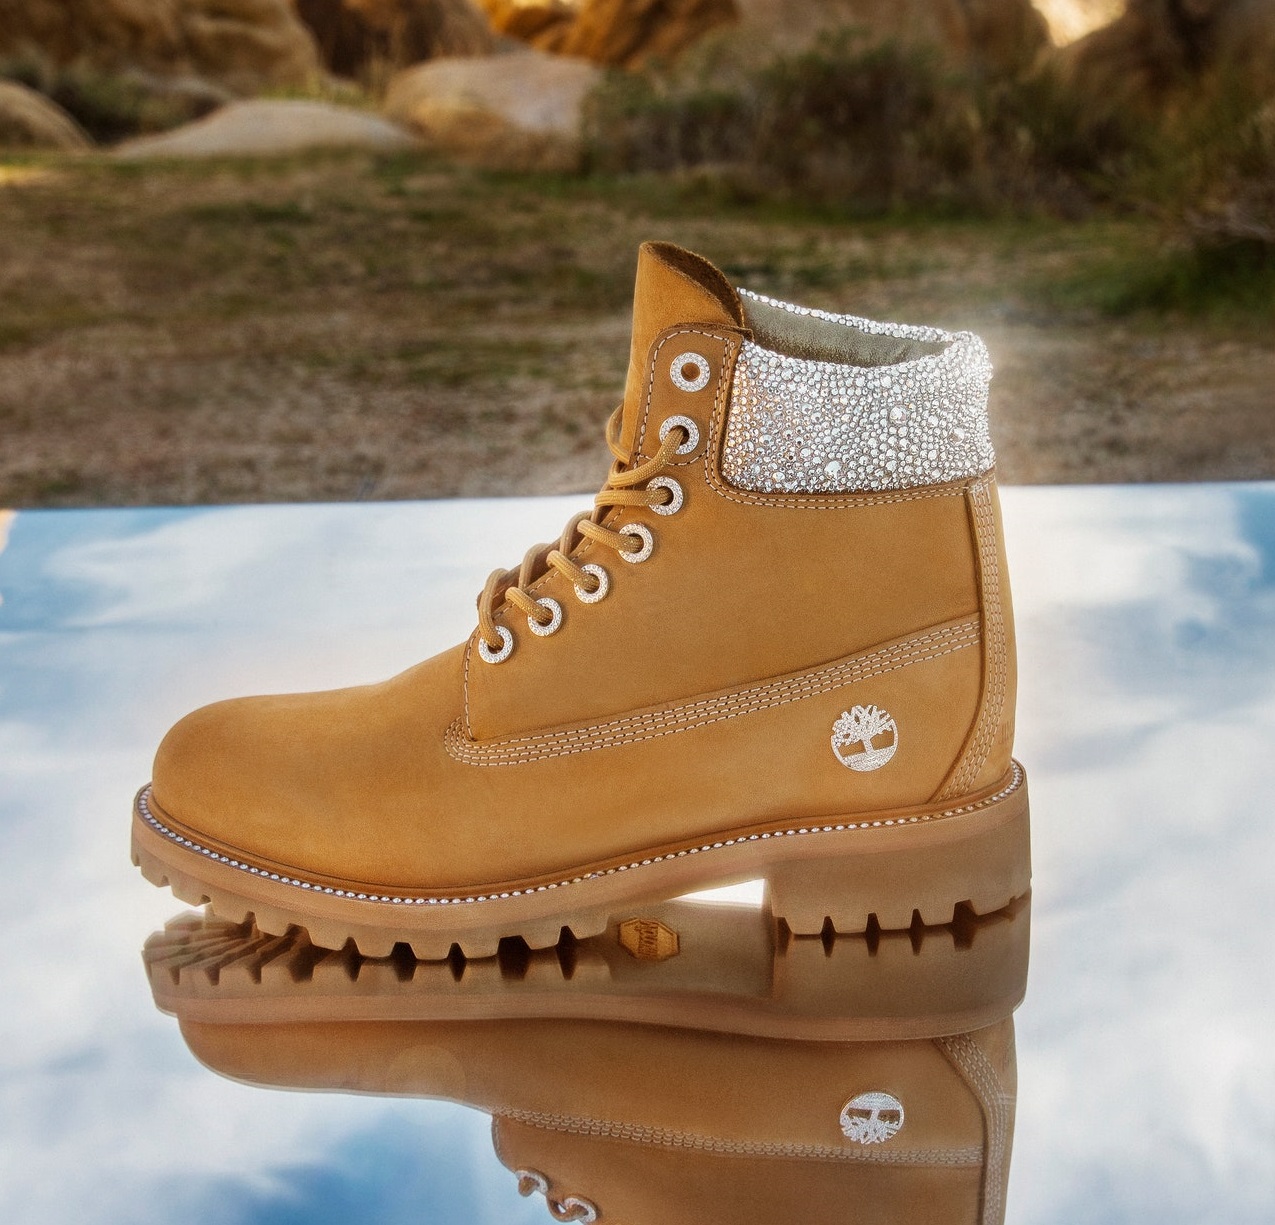 Brig Vreemdeling brandwonden Jimmy Choo Puts A Luxe Spin On Timberland's Six Inch Wheat Boot | SNOBETTE